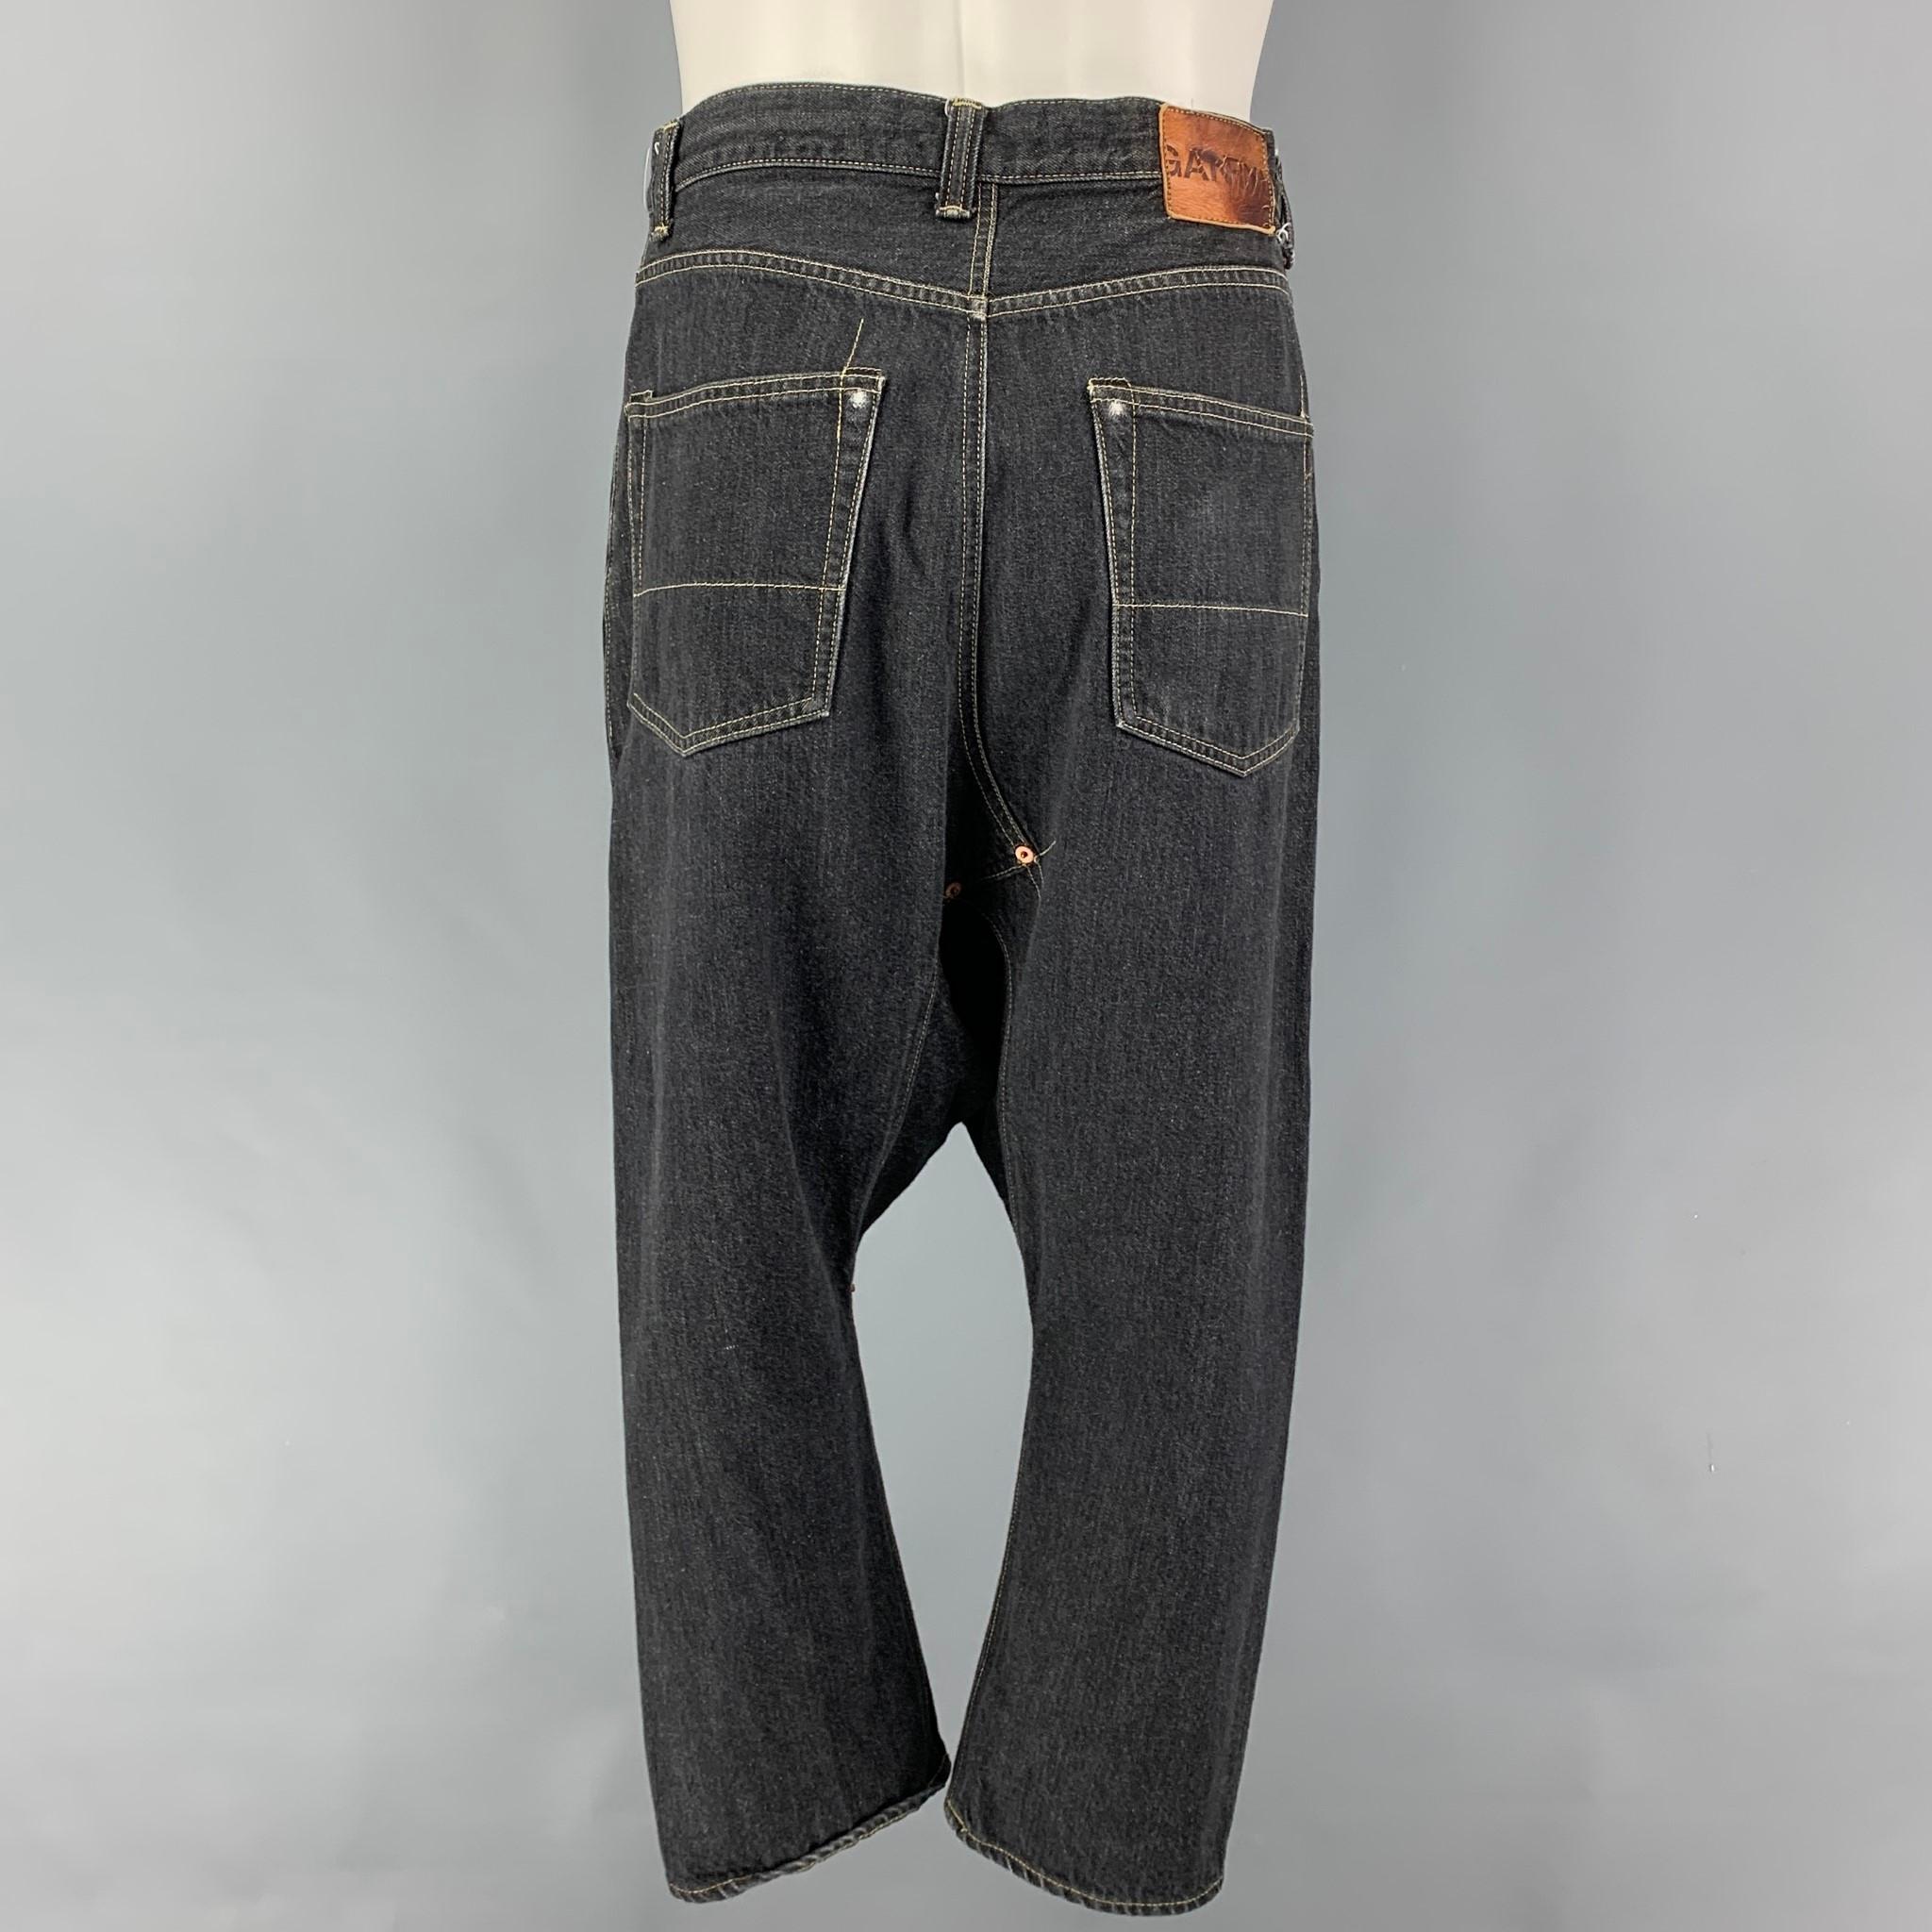 COMME des GARCONS GANRYU jeans comes in a charcoal selvedge denim featuring a drop-crotch style, contrast stitching, ad a zip fly closure. Made in Japan. 

Very Good Pre-Owned Condition.
Marked: S / AD2015

Measurements:

Waist: 32 in.
Rise: 12.5